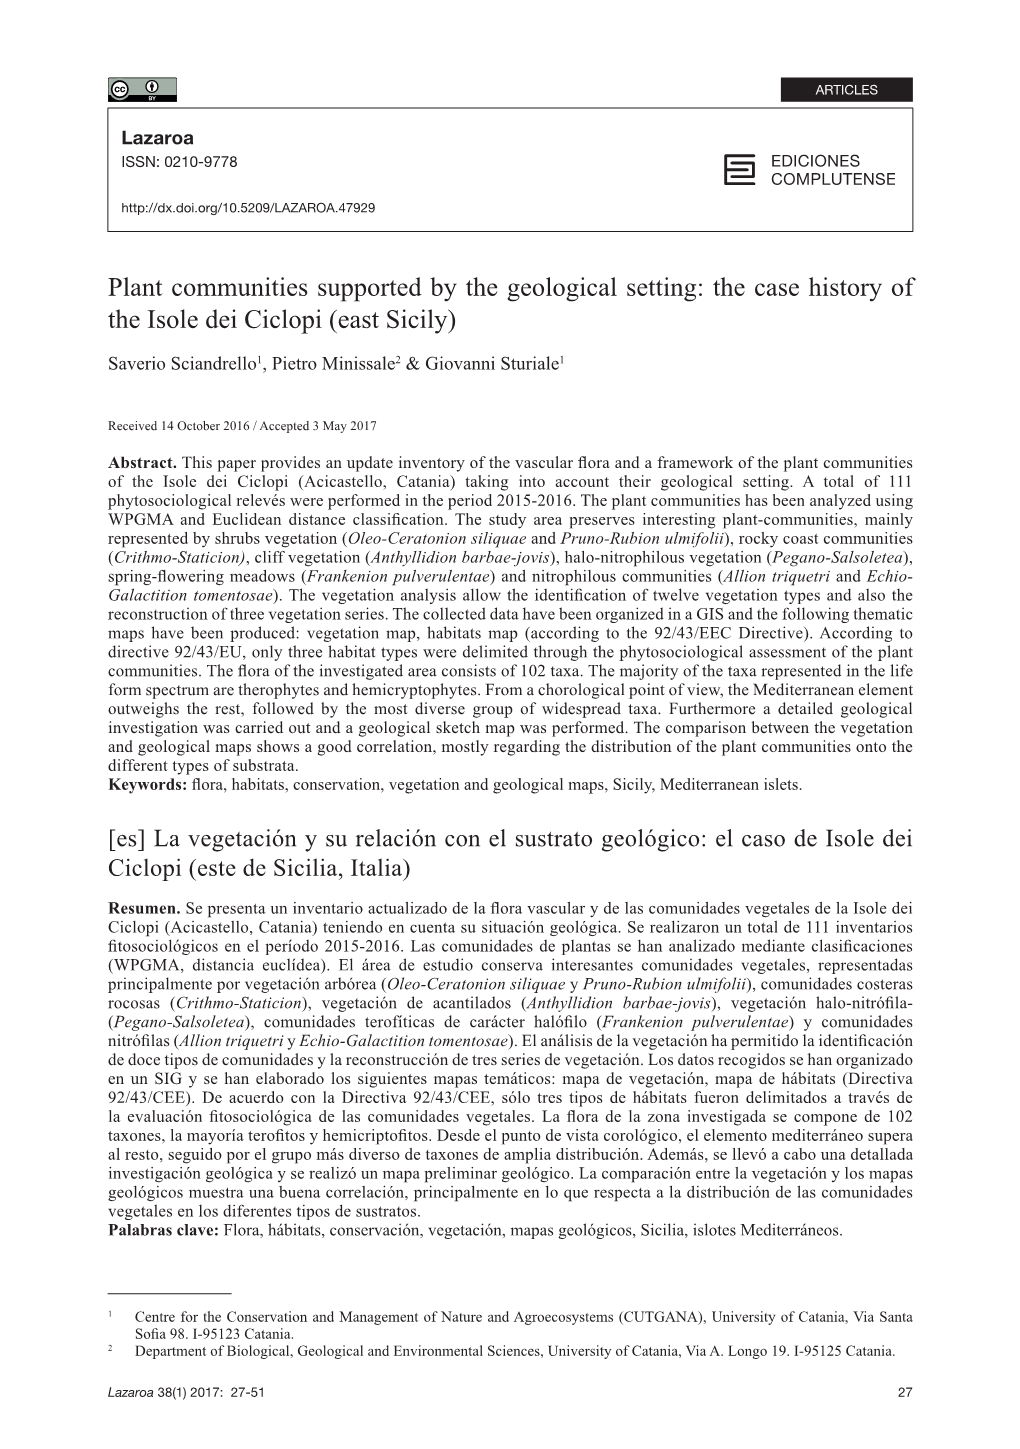 Plant Communities Supported by the Geological Setting: the Case History of the Isole Dei Ciclopi (East Sicily)